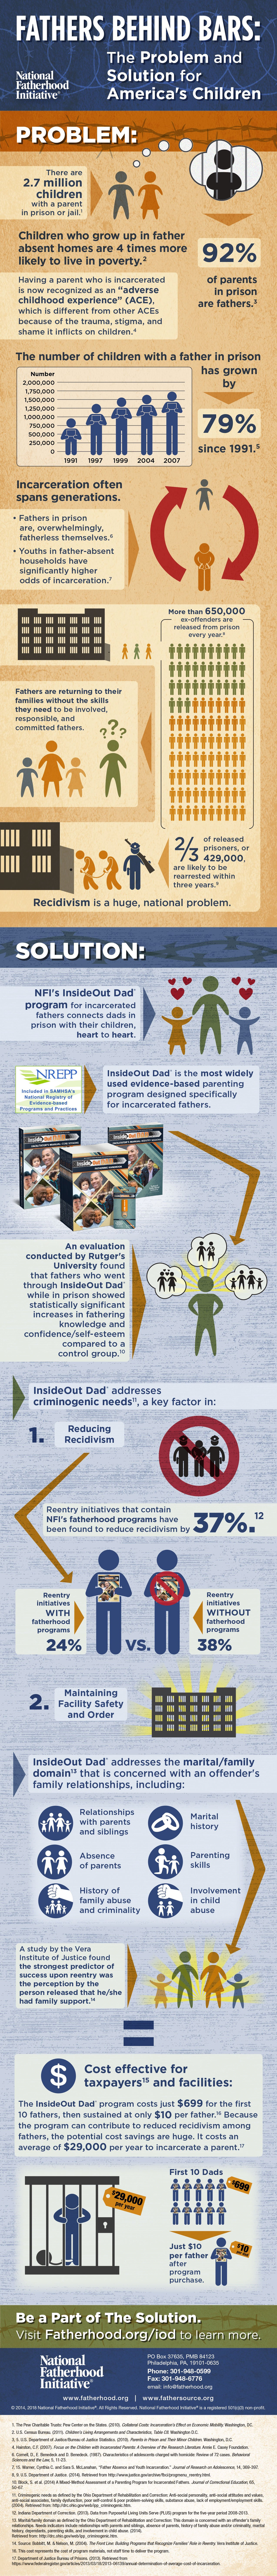 Fathers Behind Bars: The Problem & Solution for America's Children [Infographic]